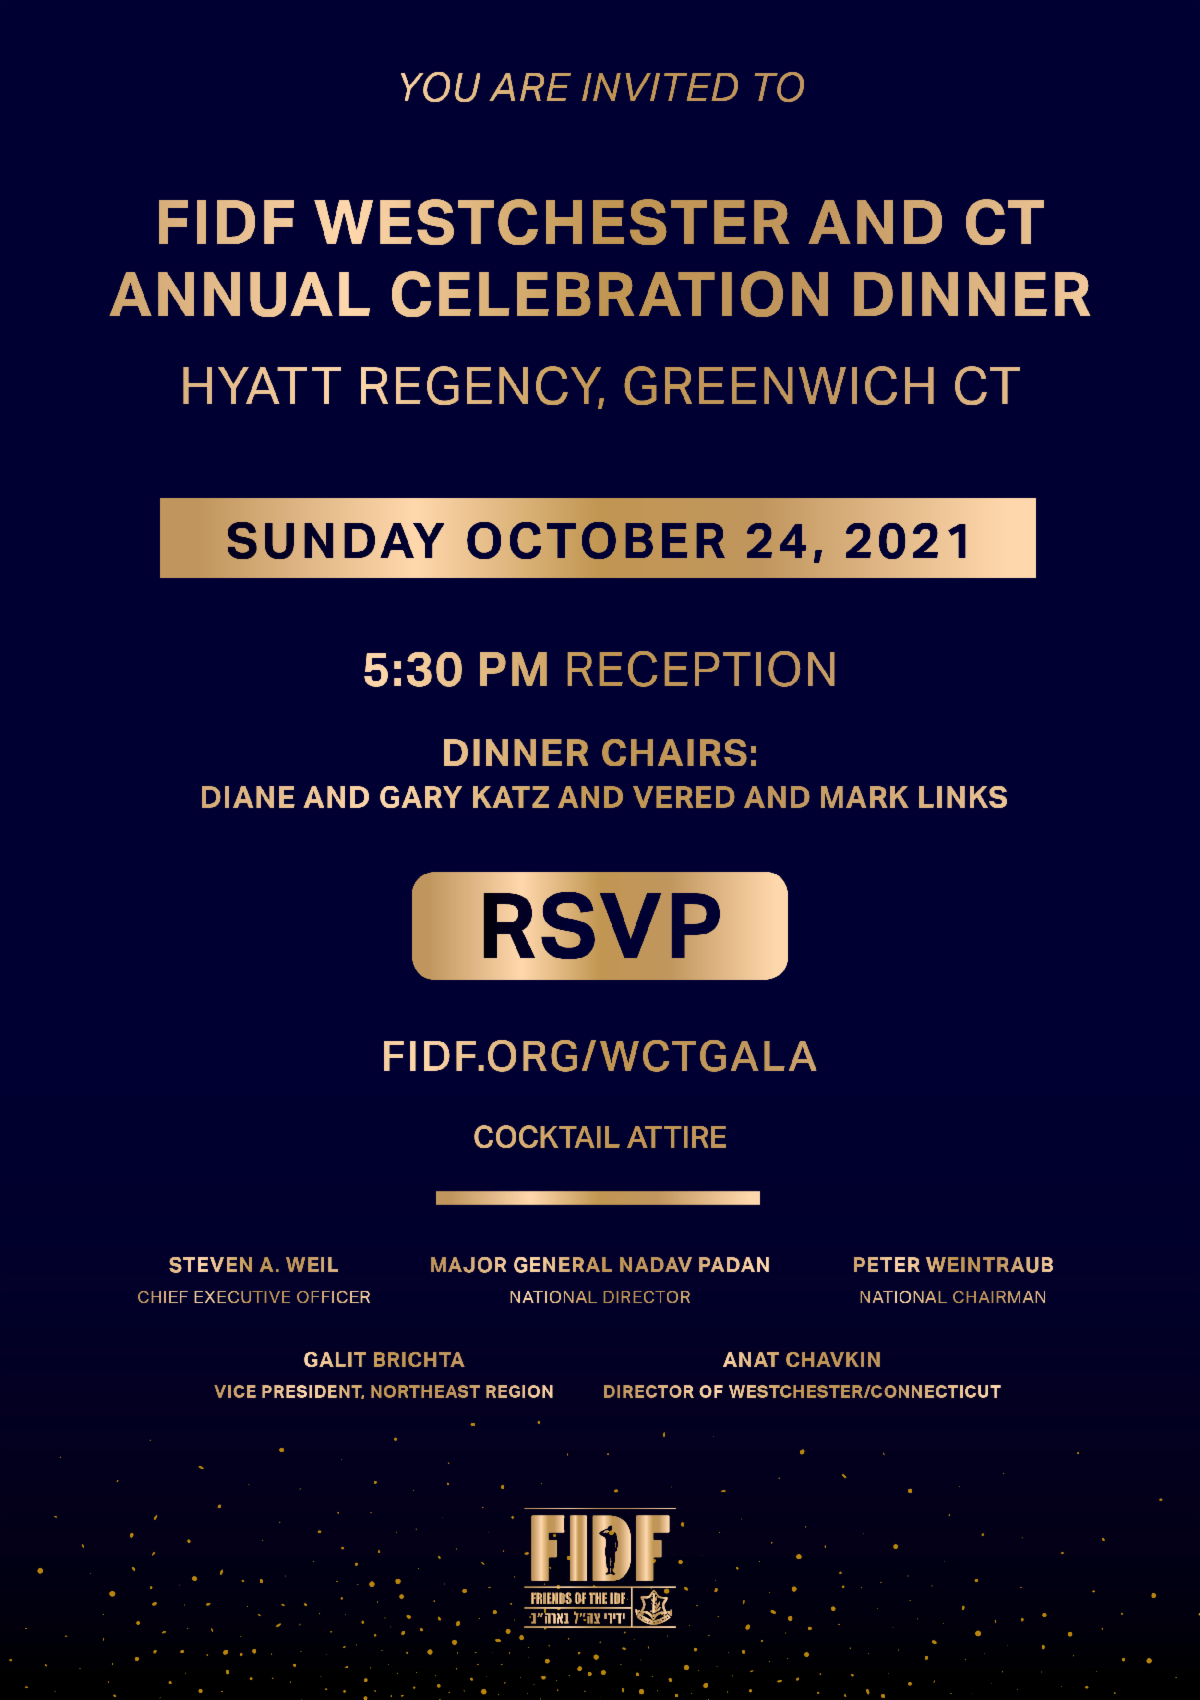 FIDF Westchester and CT Annual Celebration Dinner